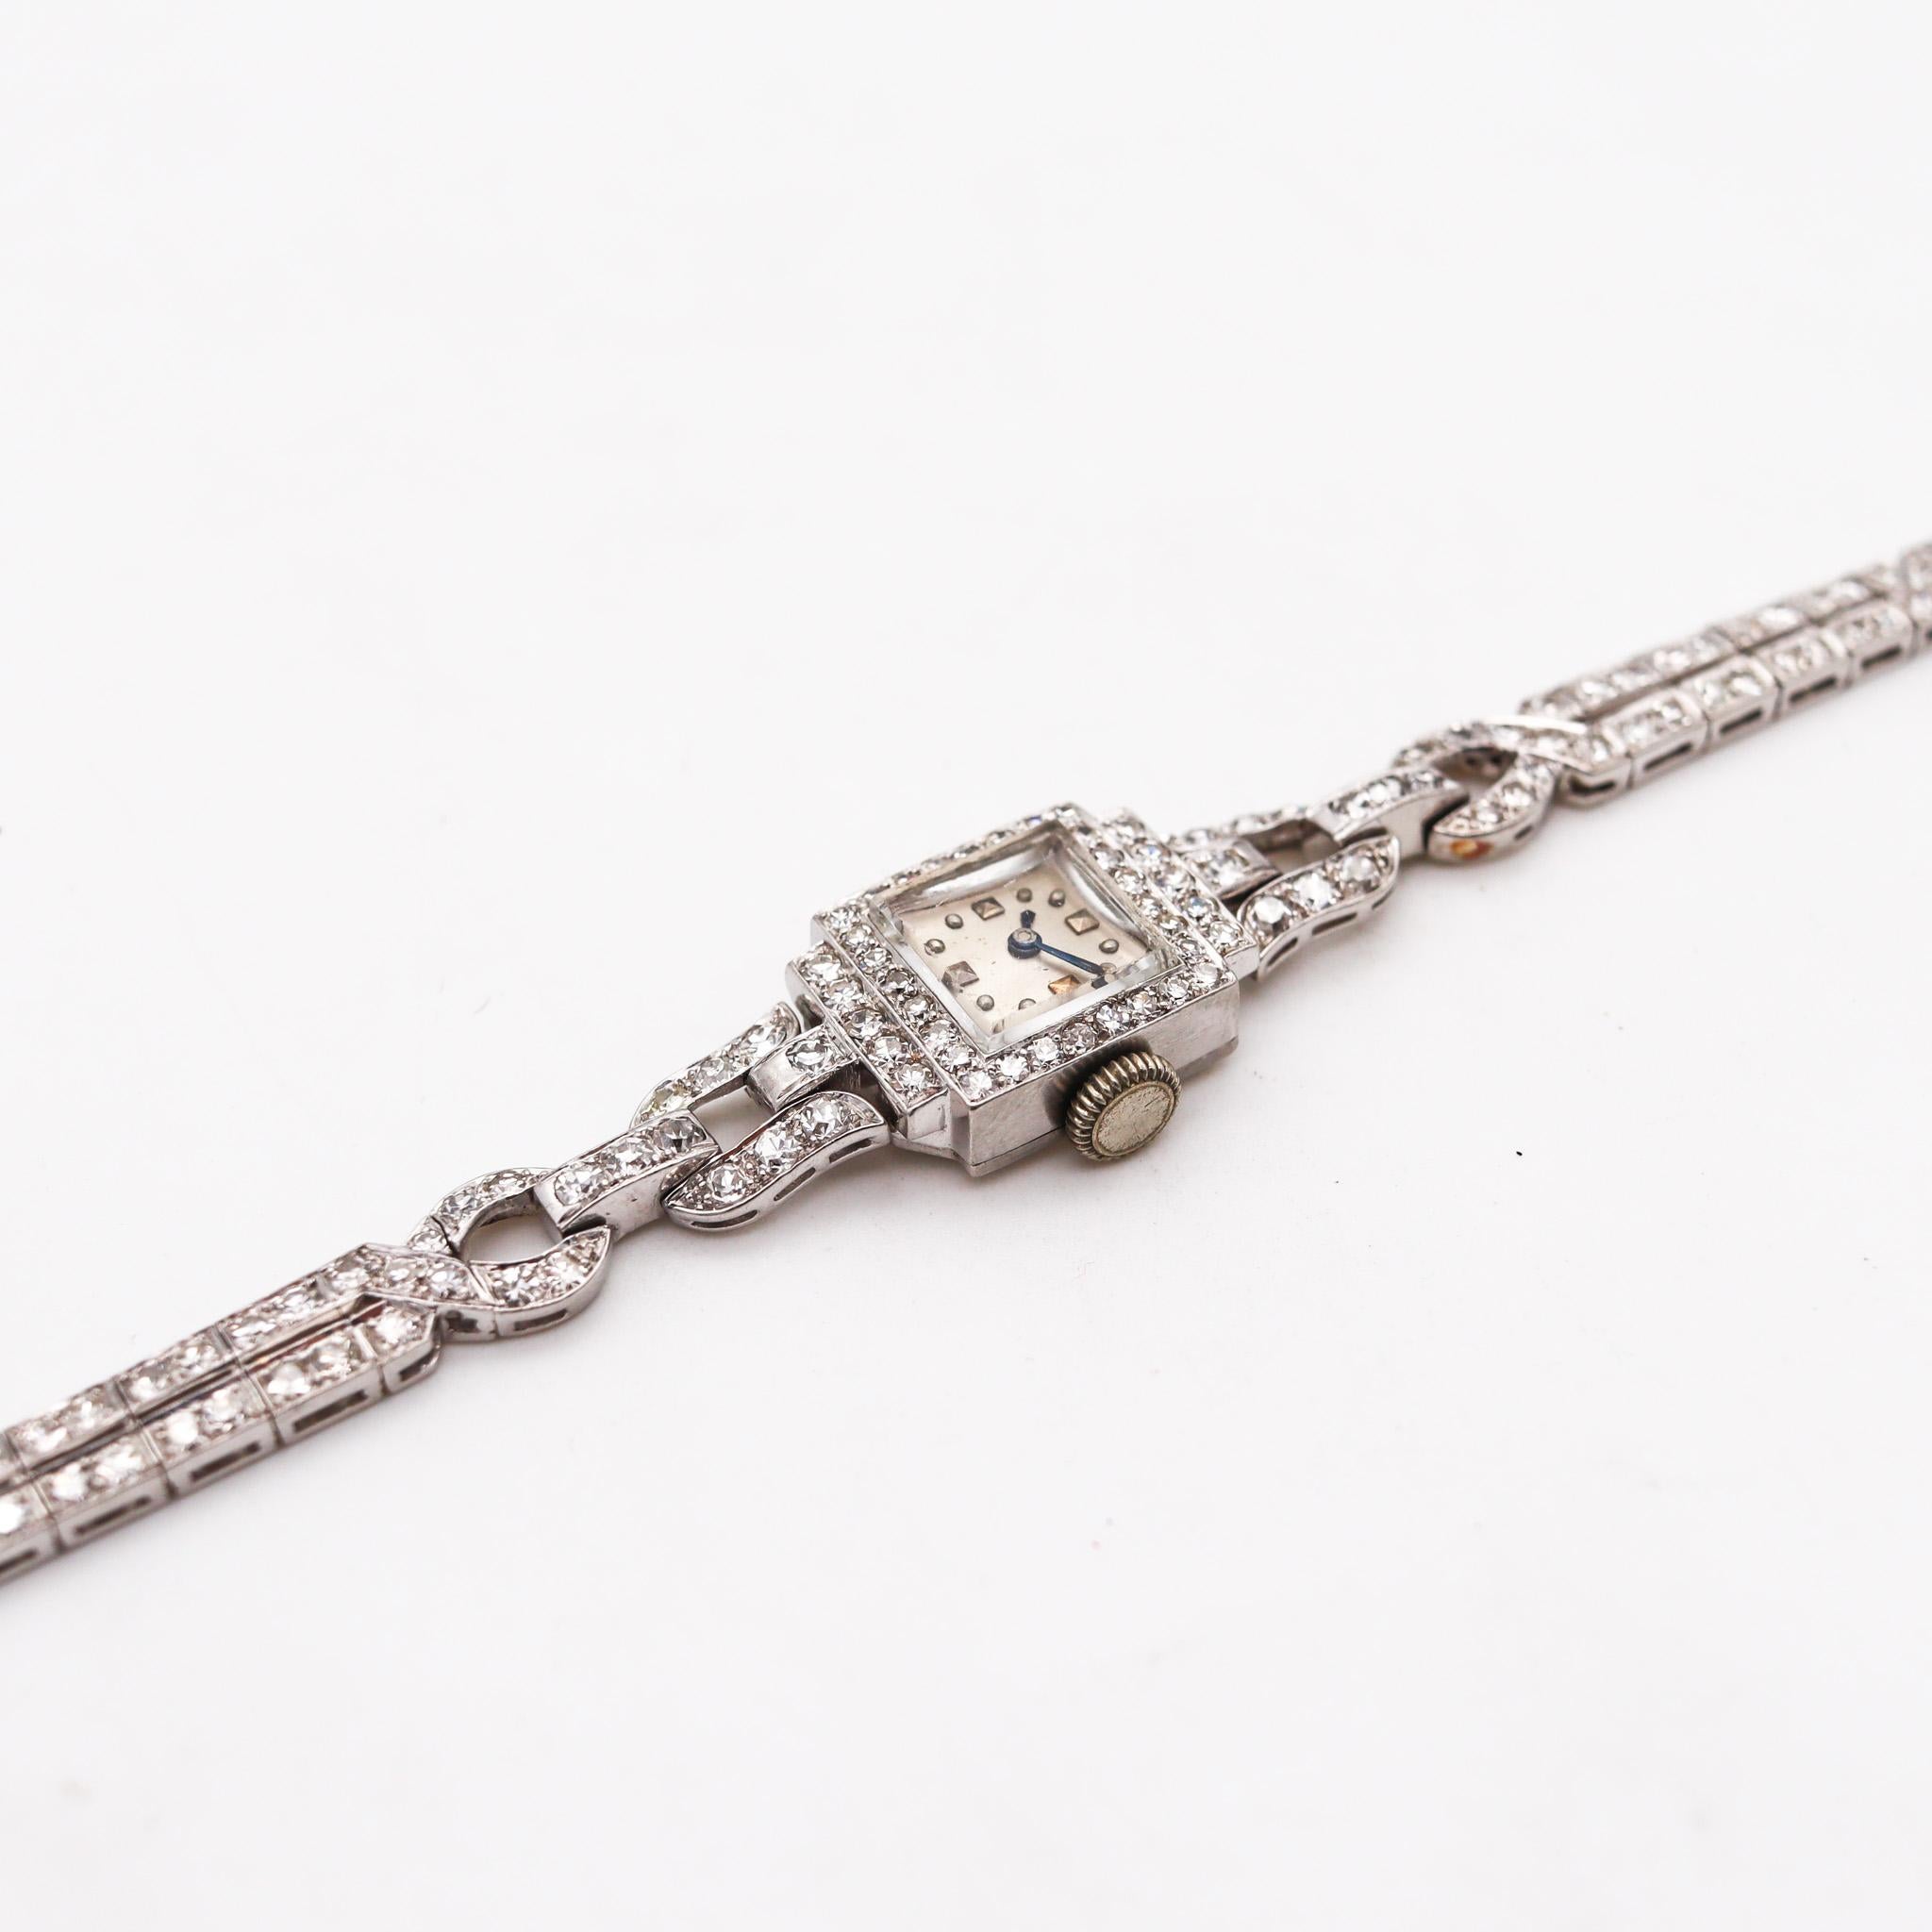 Art Deco 1930 Wrist Watch in .900 Platinum with 4.98 Ctw in Round Diamonds For Sale 1